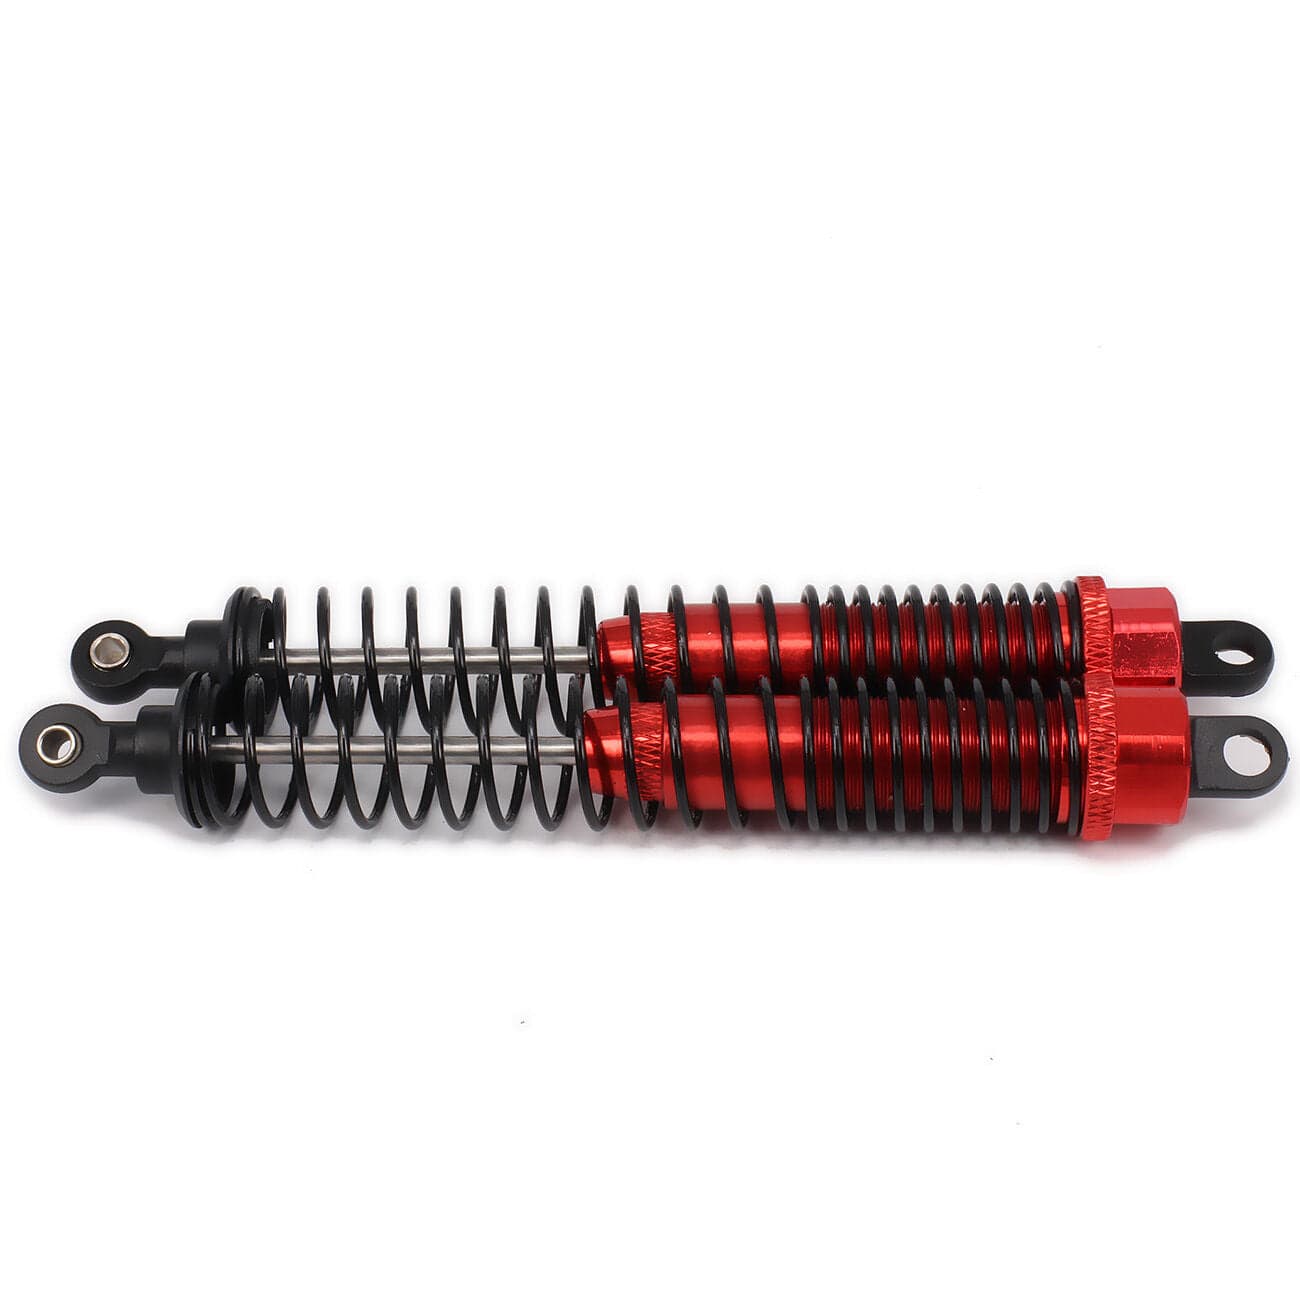 RCAWD RC CAR UPGRADE PARTS Red RCAWD Adjustable 130mm RC Shock Absorber Damper For RC Car 1/10 Model Car 2PCS